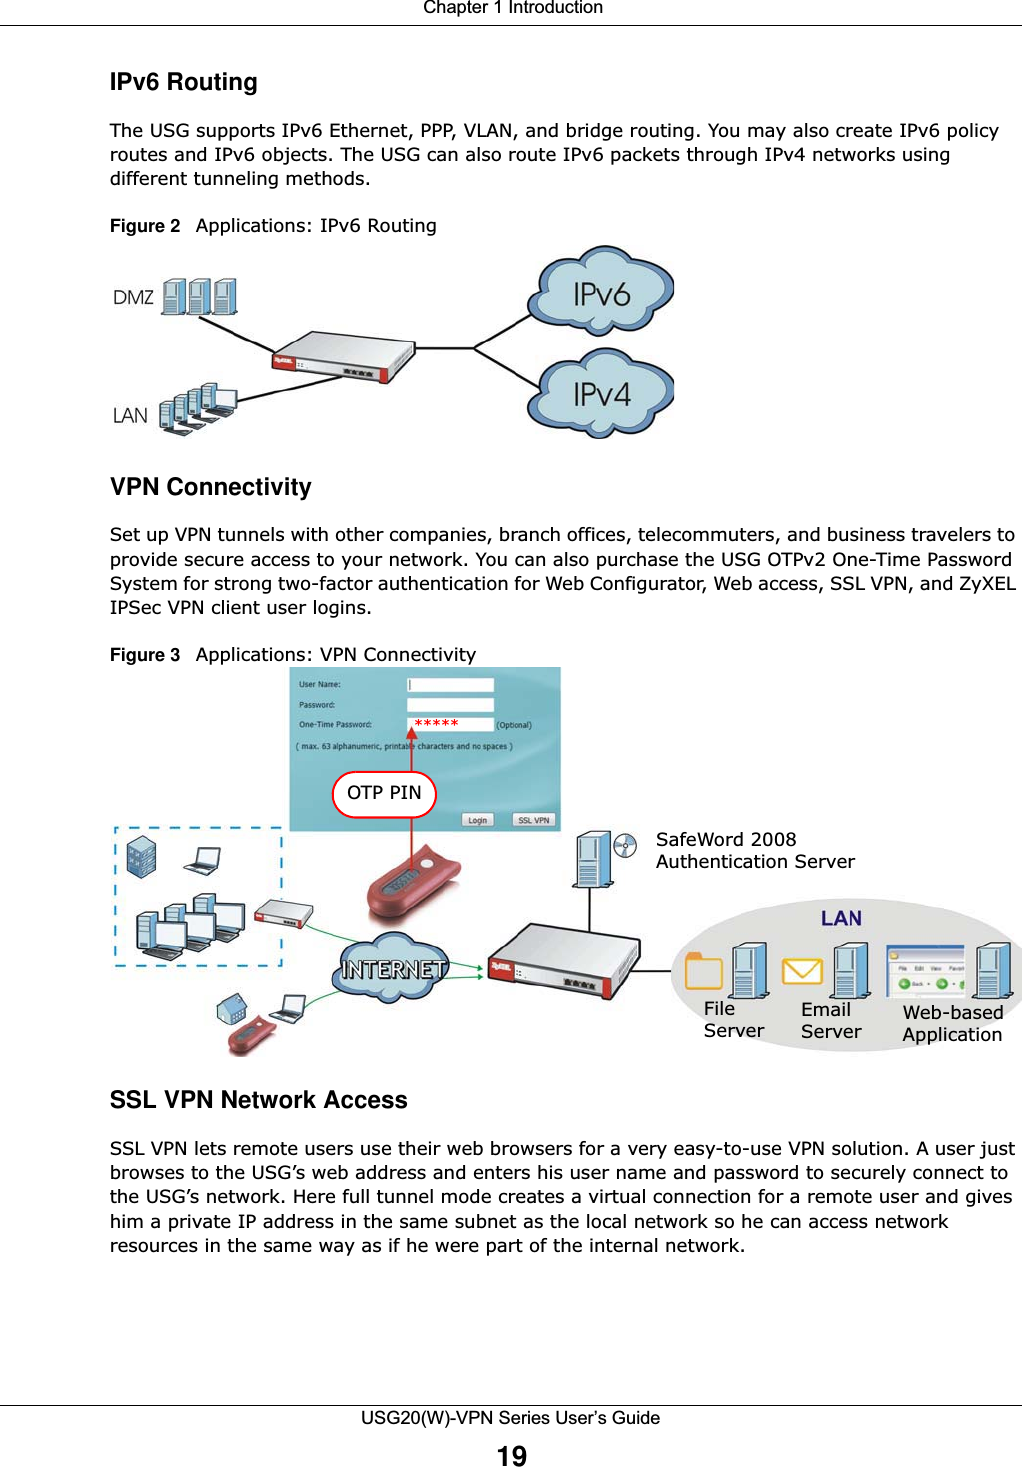  Chapter 1 IntroductionUSG20(W)-VPN Series User’s Guide19IPv6 RoutingThe USG supports IPv6 Ethernet, PPP, VLAN, and bridge routing. You may also create IPv6 policy routes and IPv6 objects. The USG can also route IPv6 packets through IPv4 networks using different tunneling methods.Figure 2   Applications: IPv6 RoutingVPN ConnectivitySet up VPN tunnels with other companies, branch offices, telecommuters, and business travelers to provide secure access to your network. You can also purchase the USG OTPv2 One-Time Password System for strong two-factor authentication for Web Configurator, Web access, SSL VPN, and ZyXEL IPSec VPN client user logins. Figure 3   Applications: VPN ConnectivitySSL VPN Network Access SSL VPN lets remote users use their web browsers for a very easy-to-use VPN solution. A user just browses to the USG’s web address and enters his user name and password to securely connect to the USG’s network. Here full tunnel mode creates a virtual connection for a remote user and gives him a private IP address in the same subnet as the local network so he can access network resources in the same way as if he were part of the internal network.  OTP PINSafeWord 2008Authentication ServerFile Email  Web-based Server Server Application*****